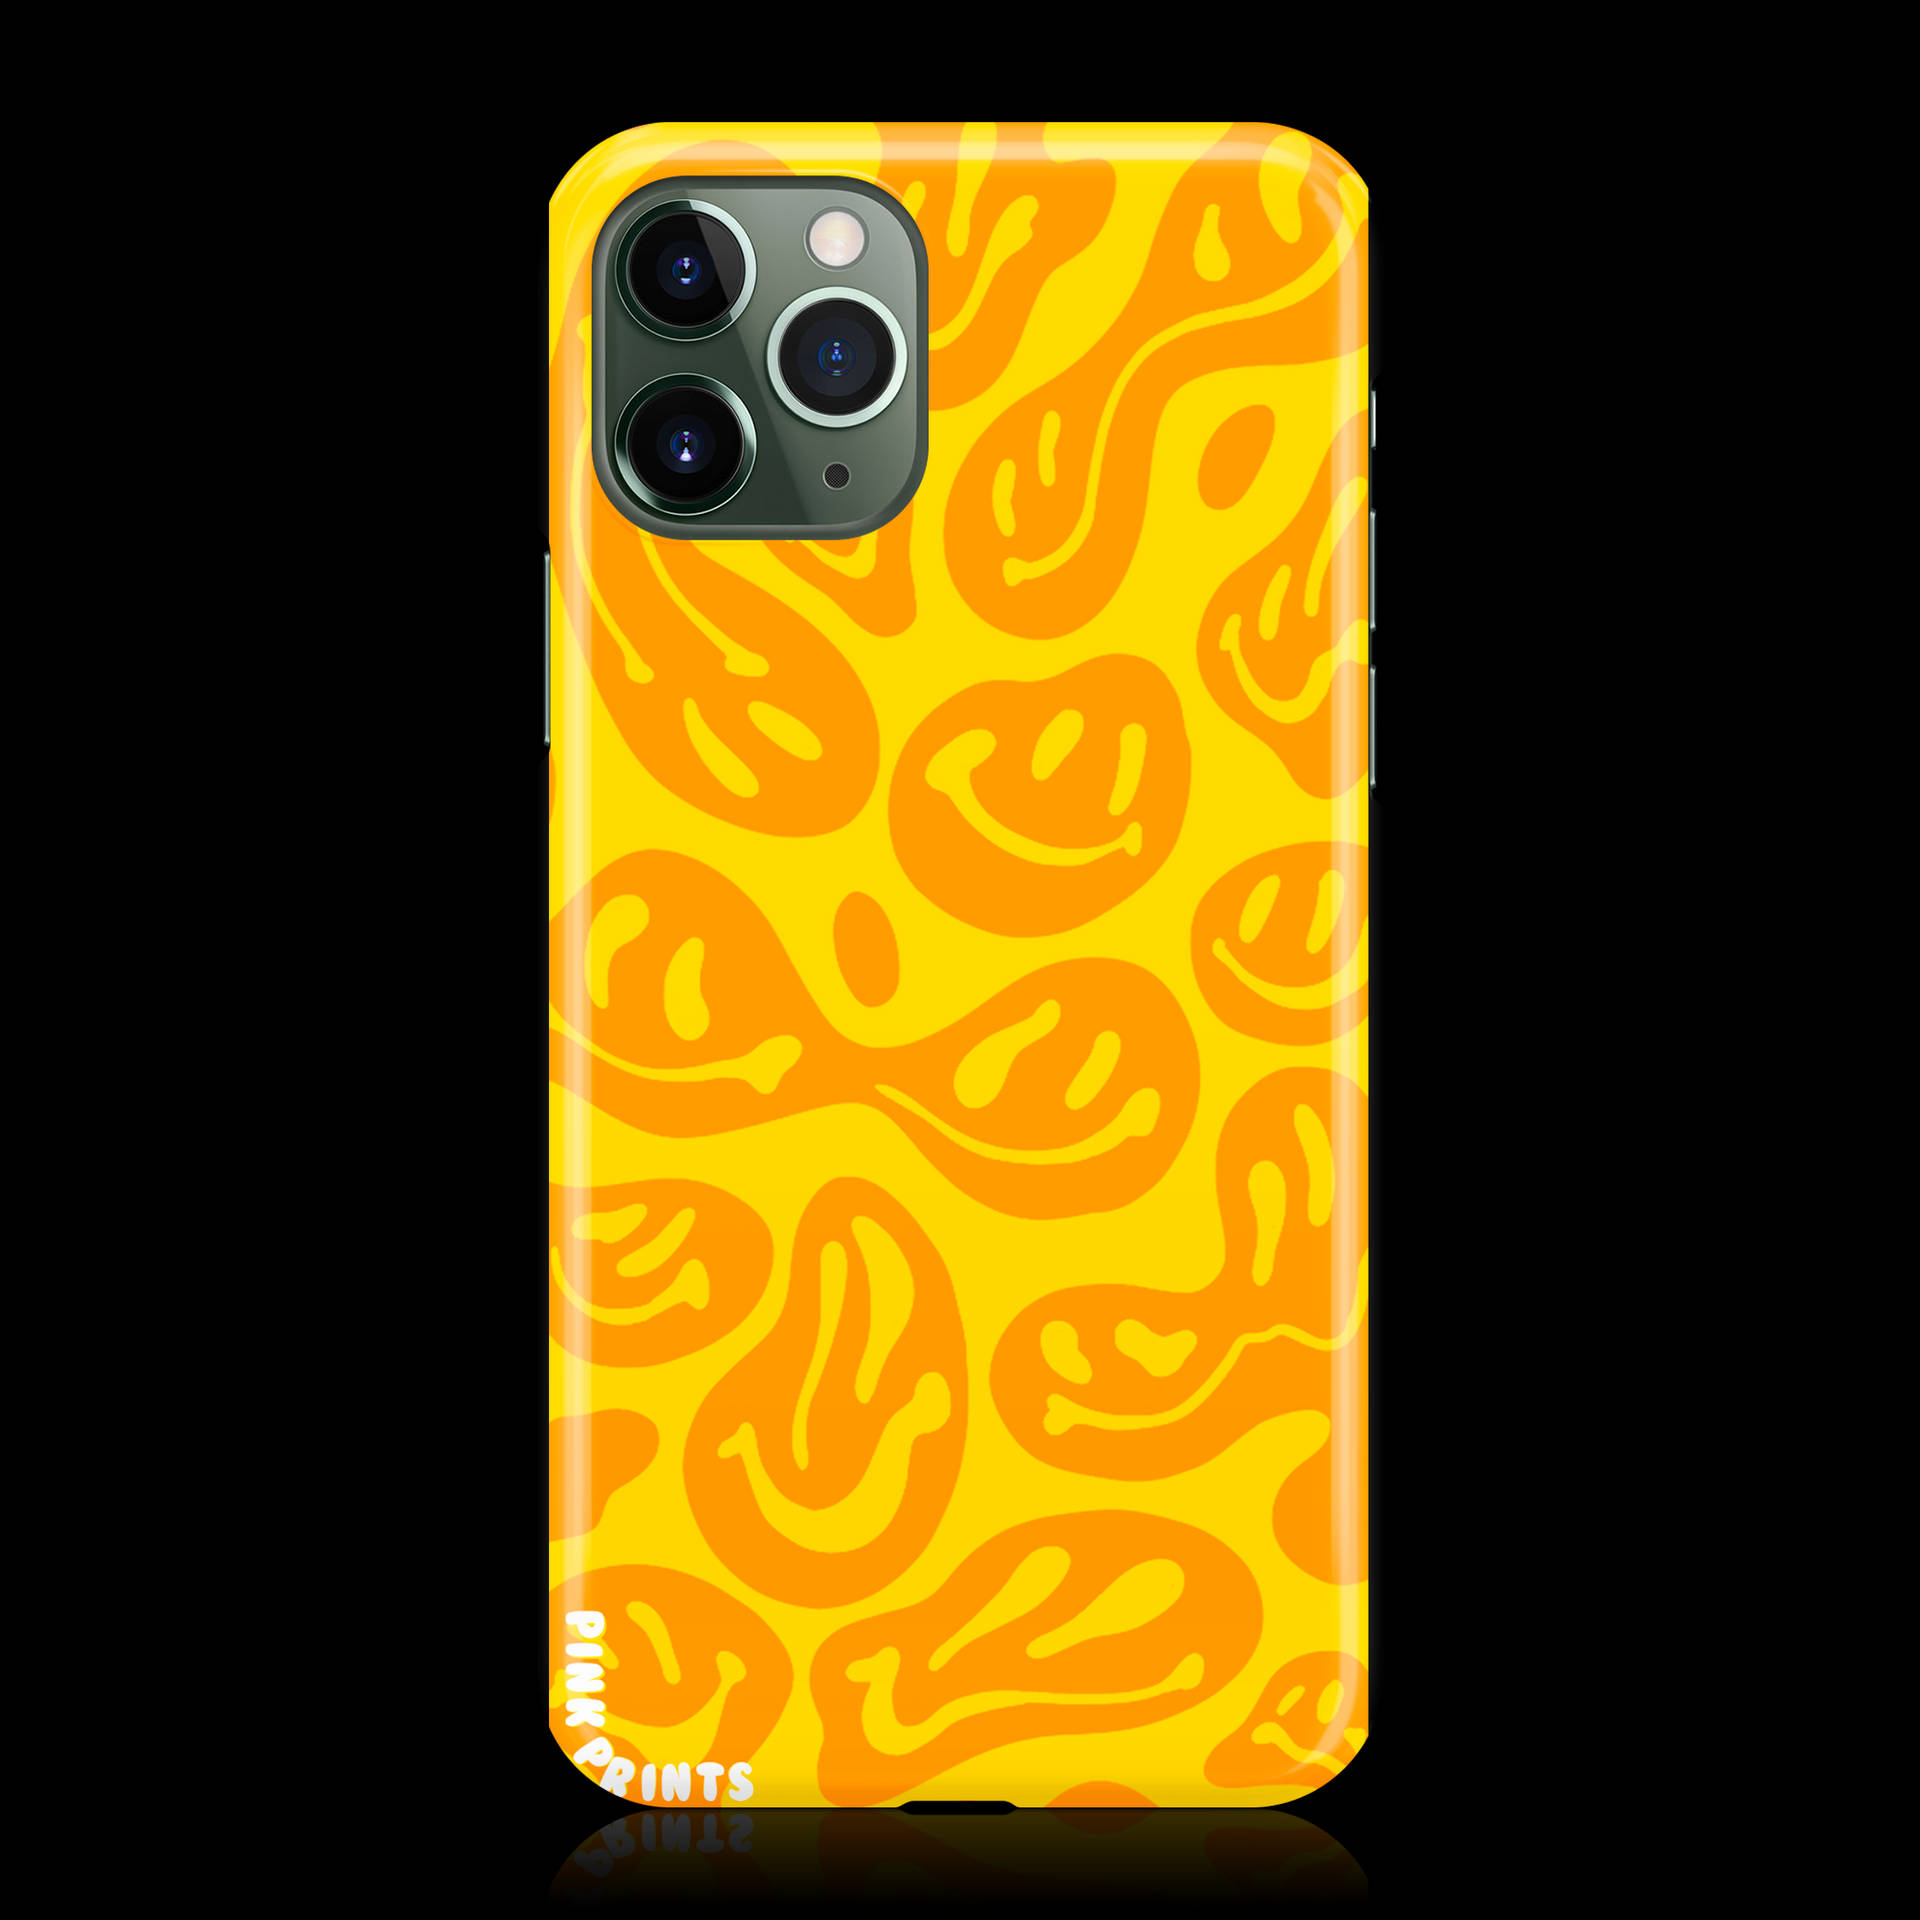 A Yellow And Orange Phone Case With A Pattern Wallpaper